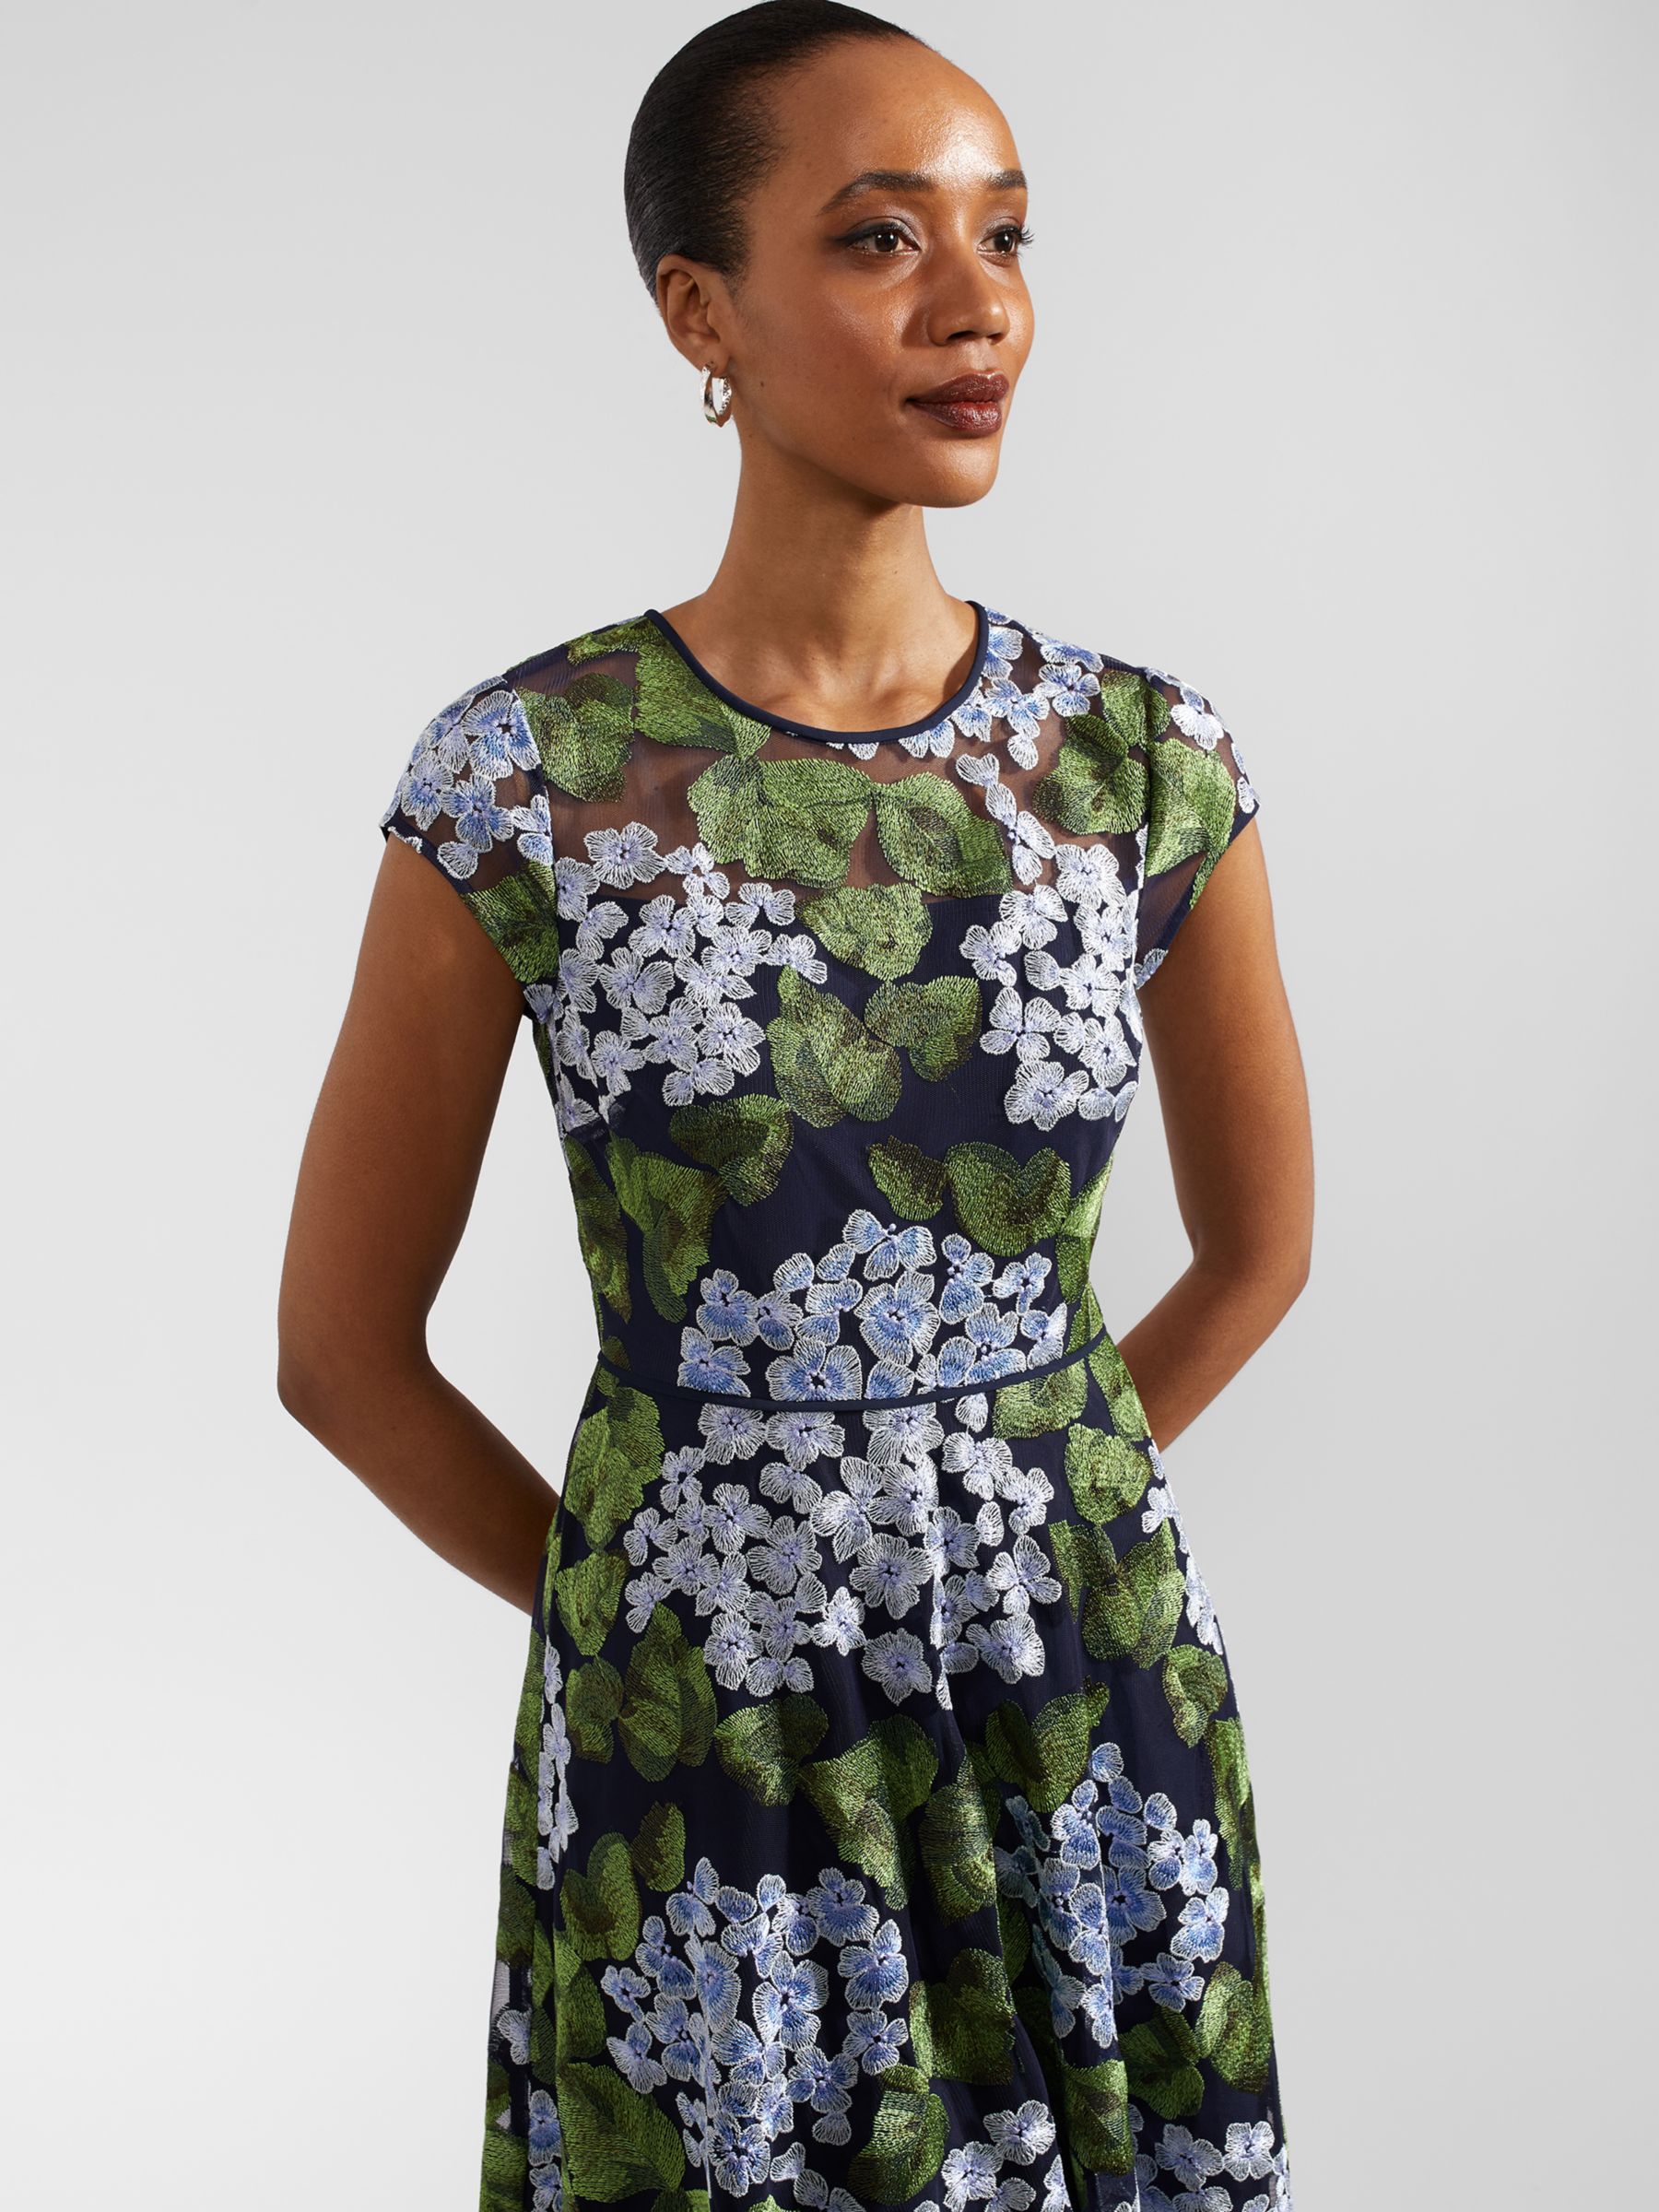 Hobbs Tia Floral Embroidery Dress, Navy/Multi, 10